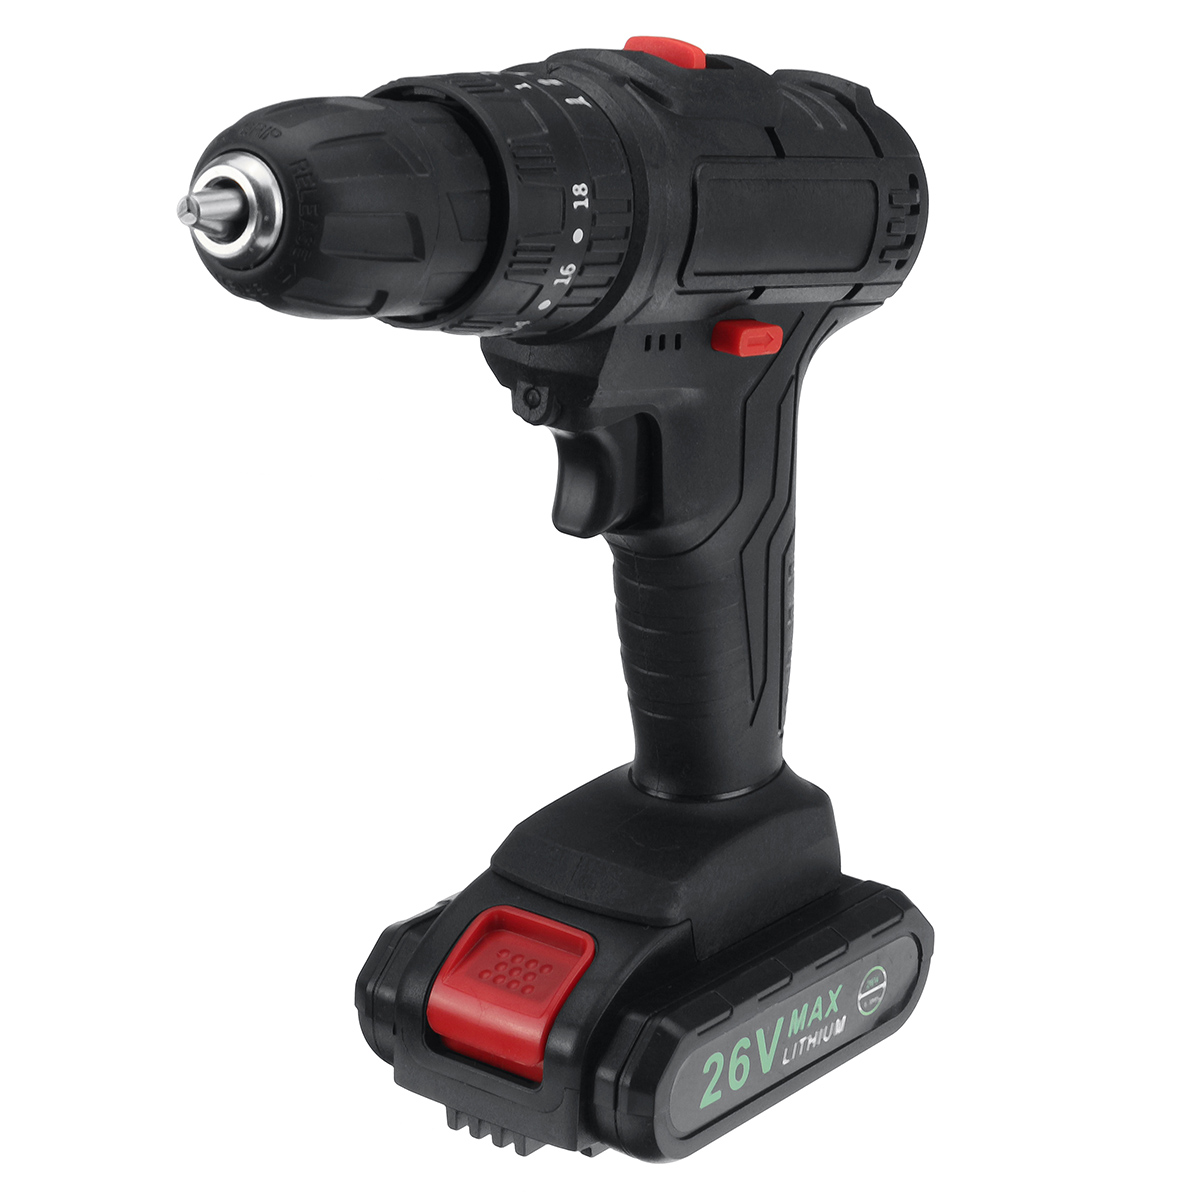 48V-1500W-Impact-Electric-Drill-28Nm-Max-Torque-LED-Light-Screwdriver-Power-W-12pc-Battery-1768847-3